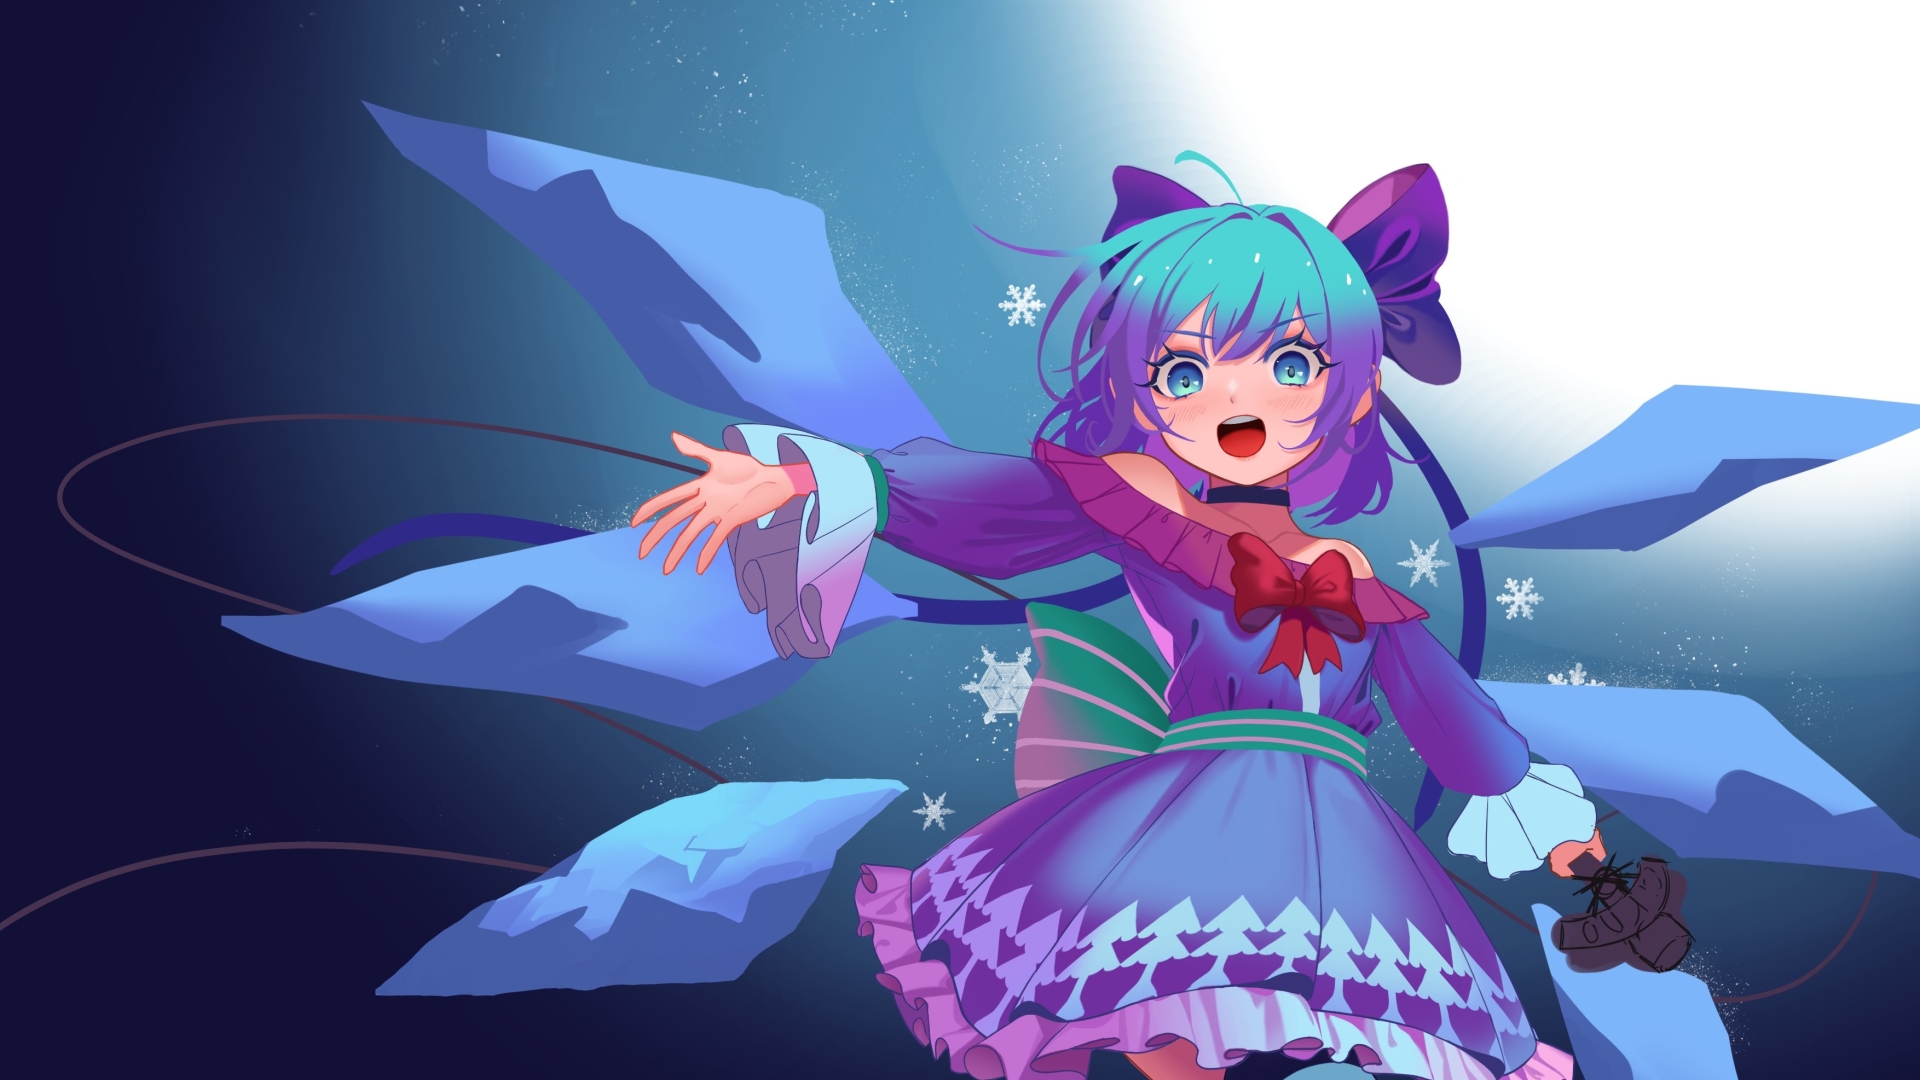 19x1080 Cirno Anime Touhou 1080p Laptop Full Hd Wallpaper Hd Anime 4k Wallpapers Images Photos And Background Wallpapers Den